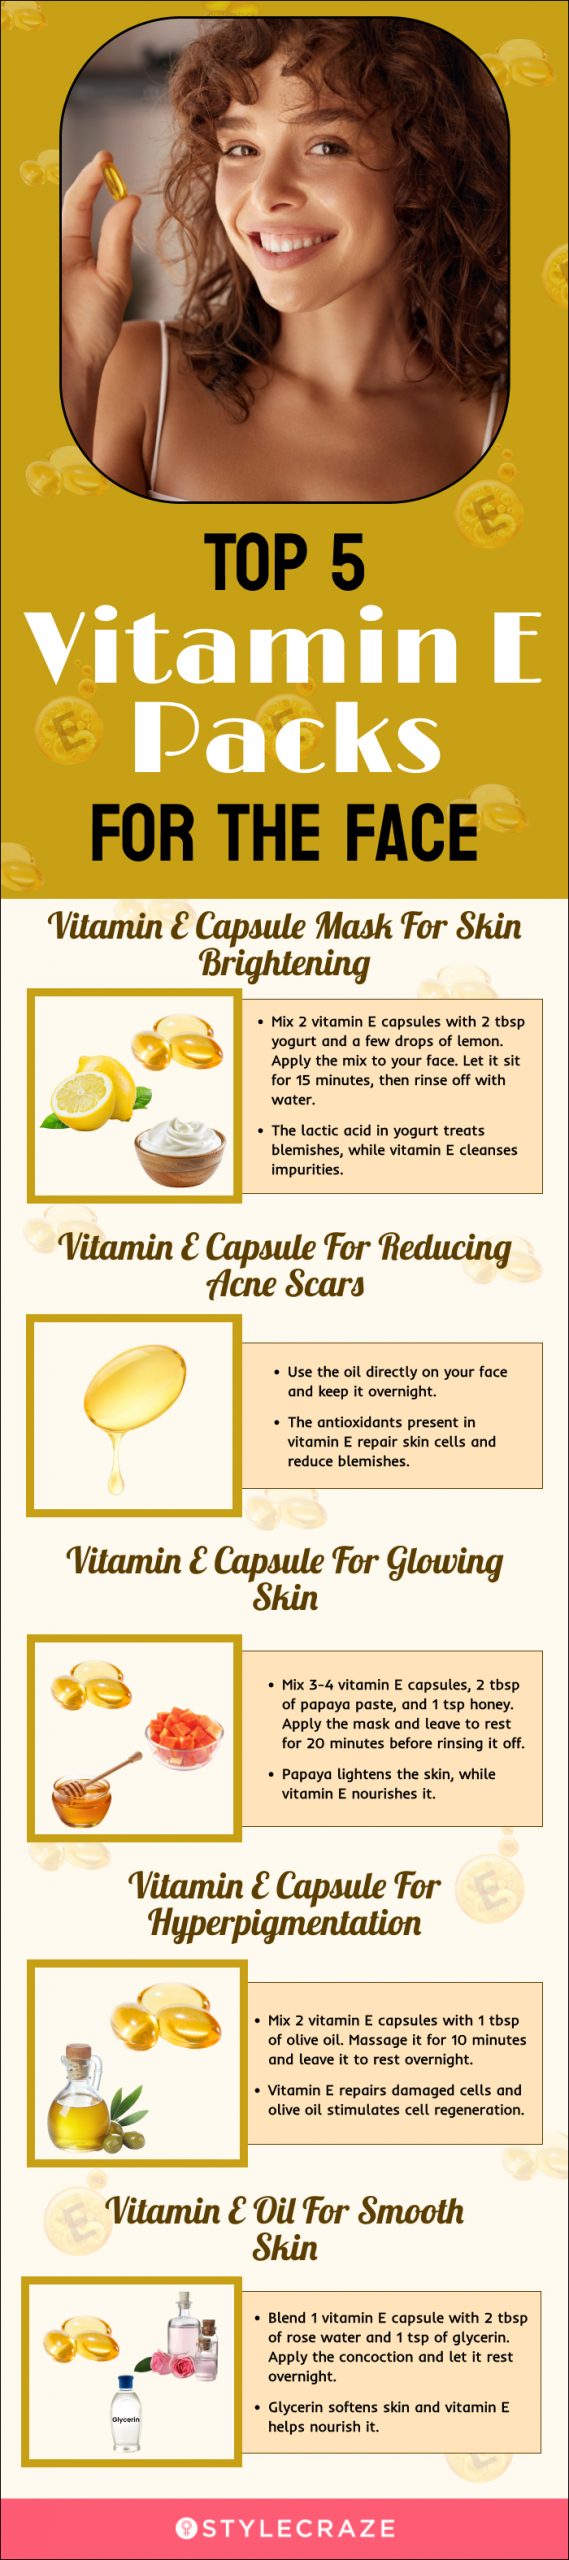 top 5 vitamin e packs for the face (infographic)